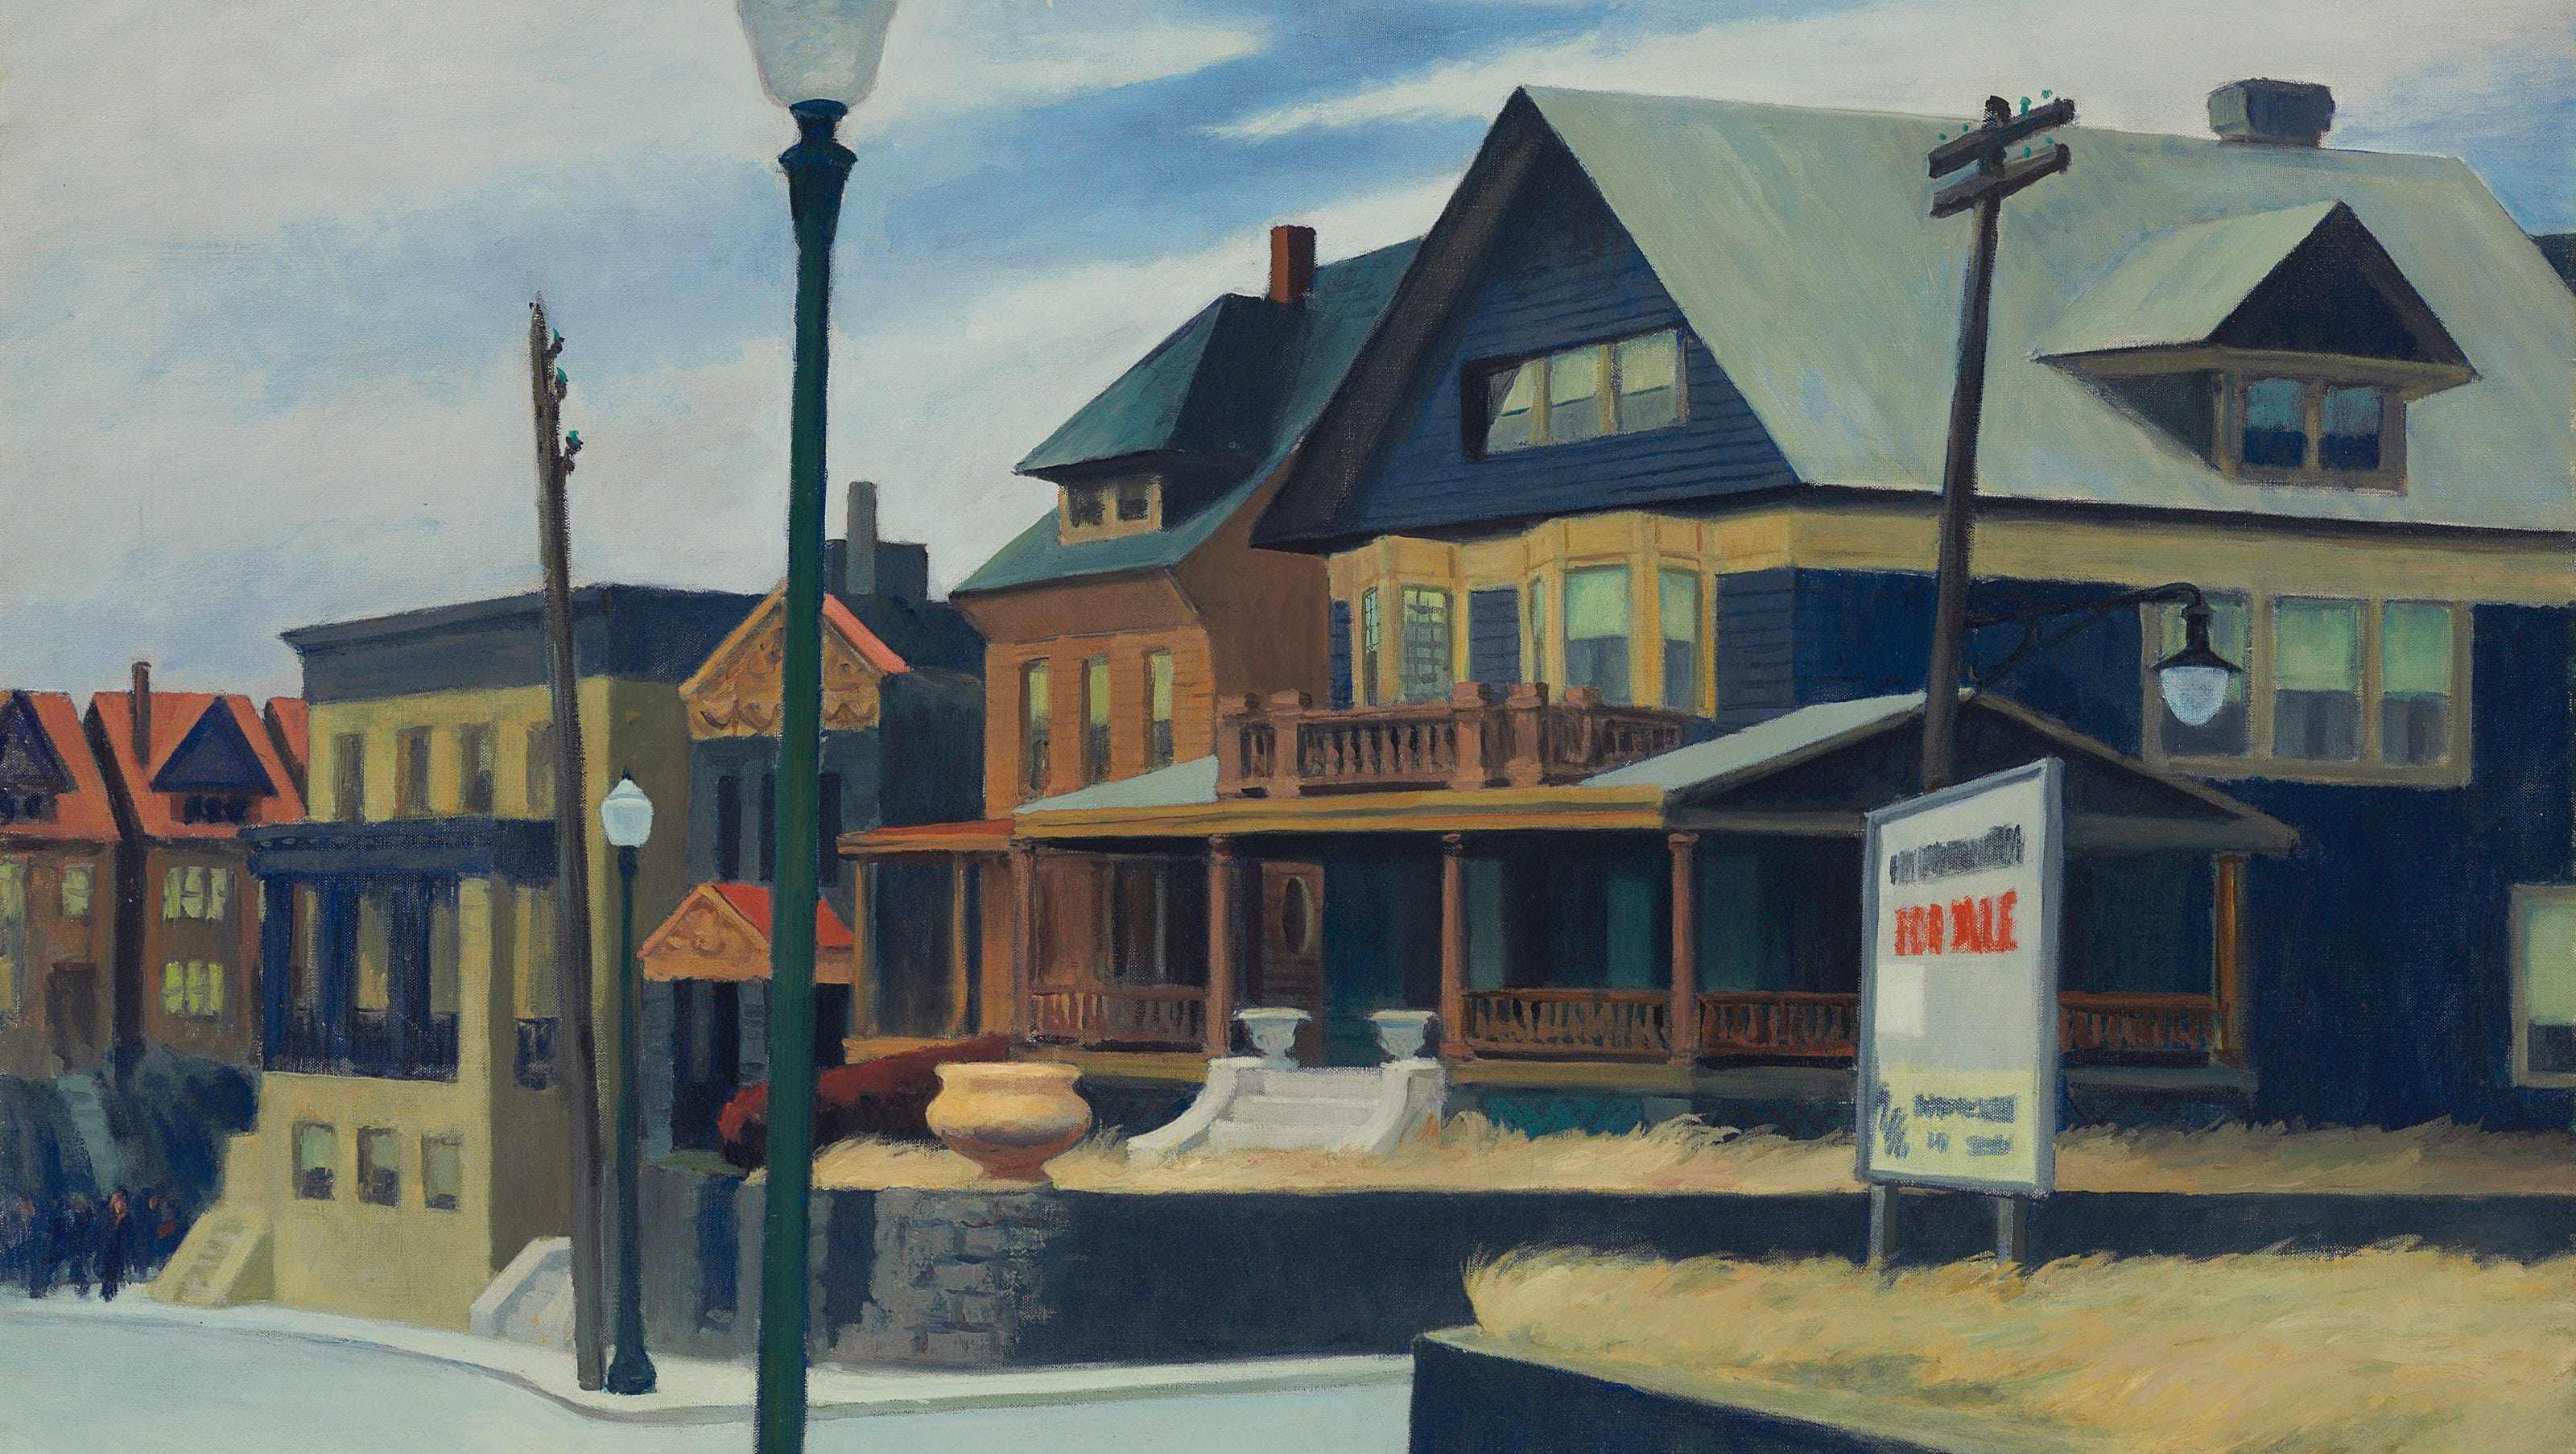 Edward Hopper painting sells for over  40M